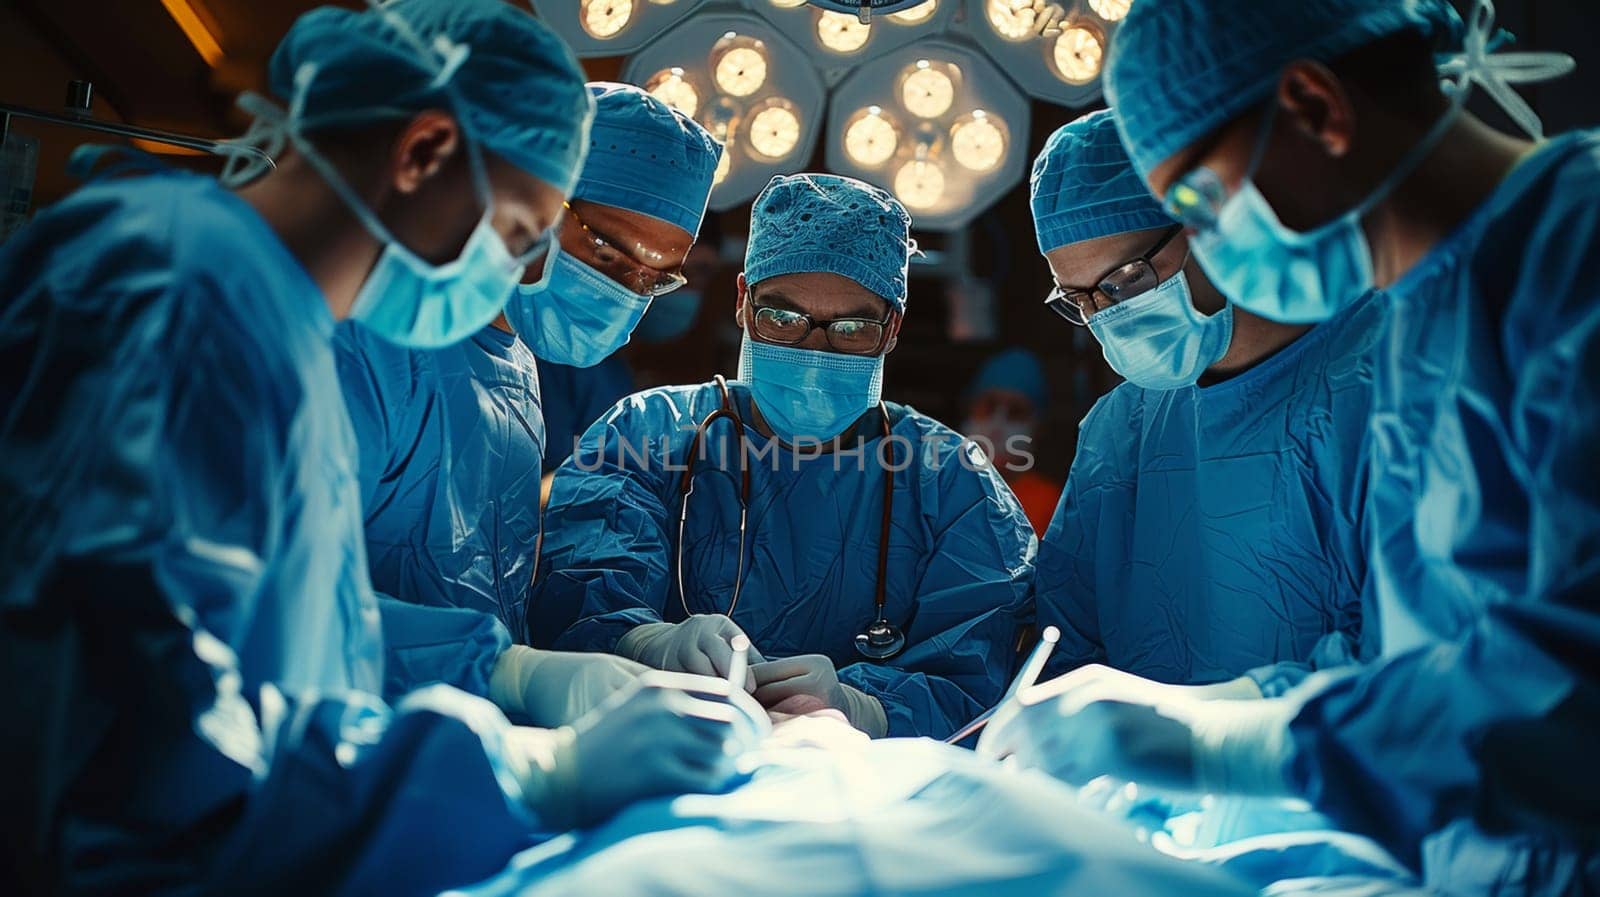 A group of surgeons are performing a surgery by papatonic